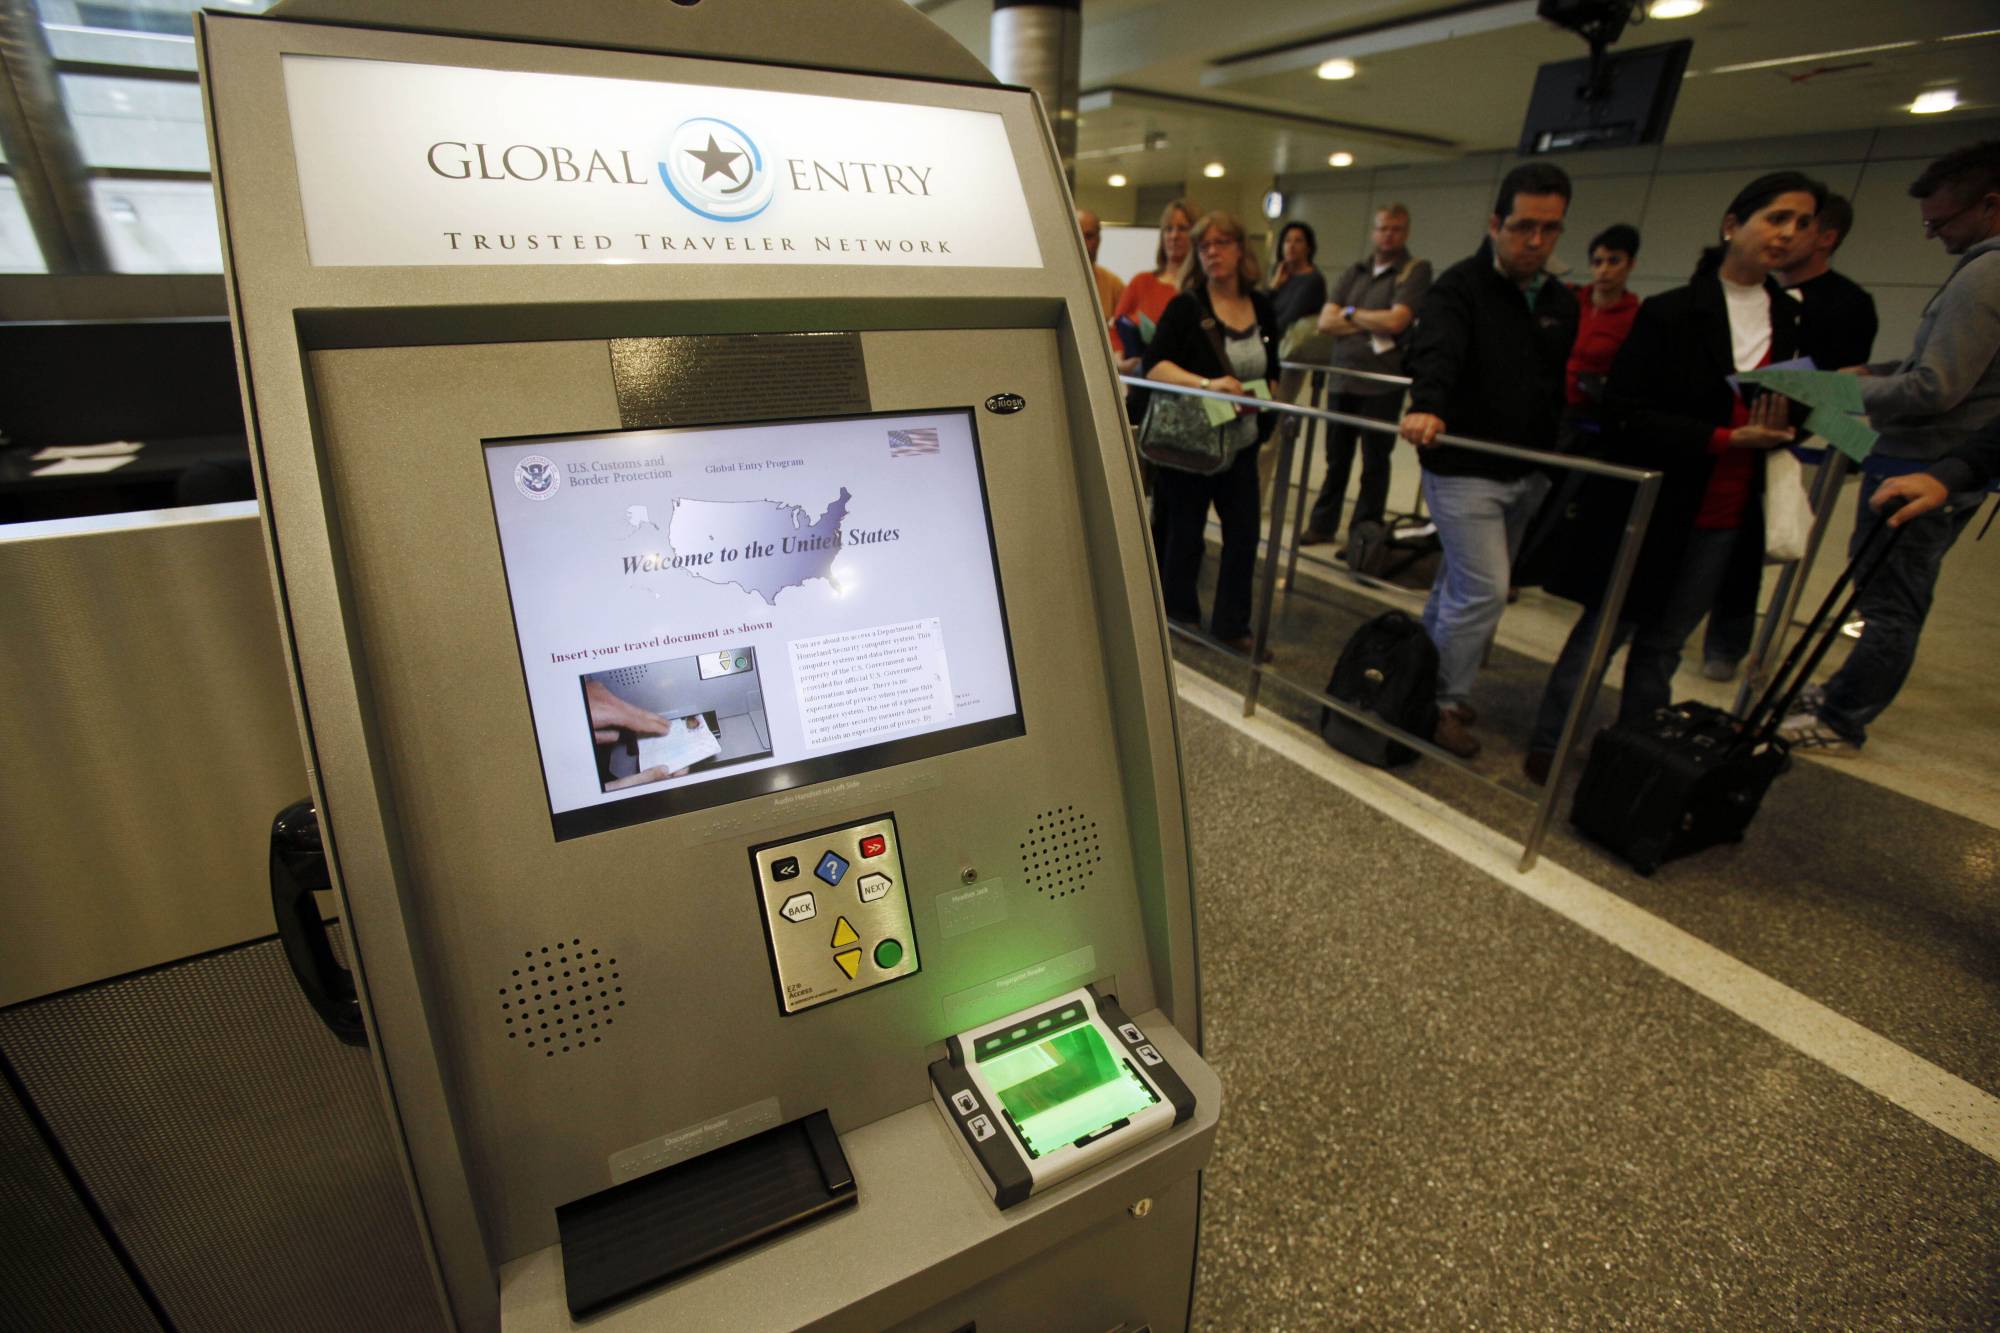 FILE - In this May 28, 2010, file photo, a Global Entry Trusted Traveler Network kiosk awaits arriving international passengers who are registered for the service at the Tom Bradley International Terminal at Los Angeles International Airport. On Thursday, July 23, 2020, the Department of Homeland Security announced that New Yorkers would once again be allowed to enroll and re-enroll in Global Entry and other federal travel programs that allow vetted travelers to avoid long security lines at the U.S. border. (AP Photo/Reed Saxon, File)